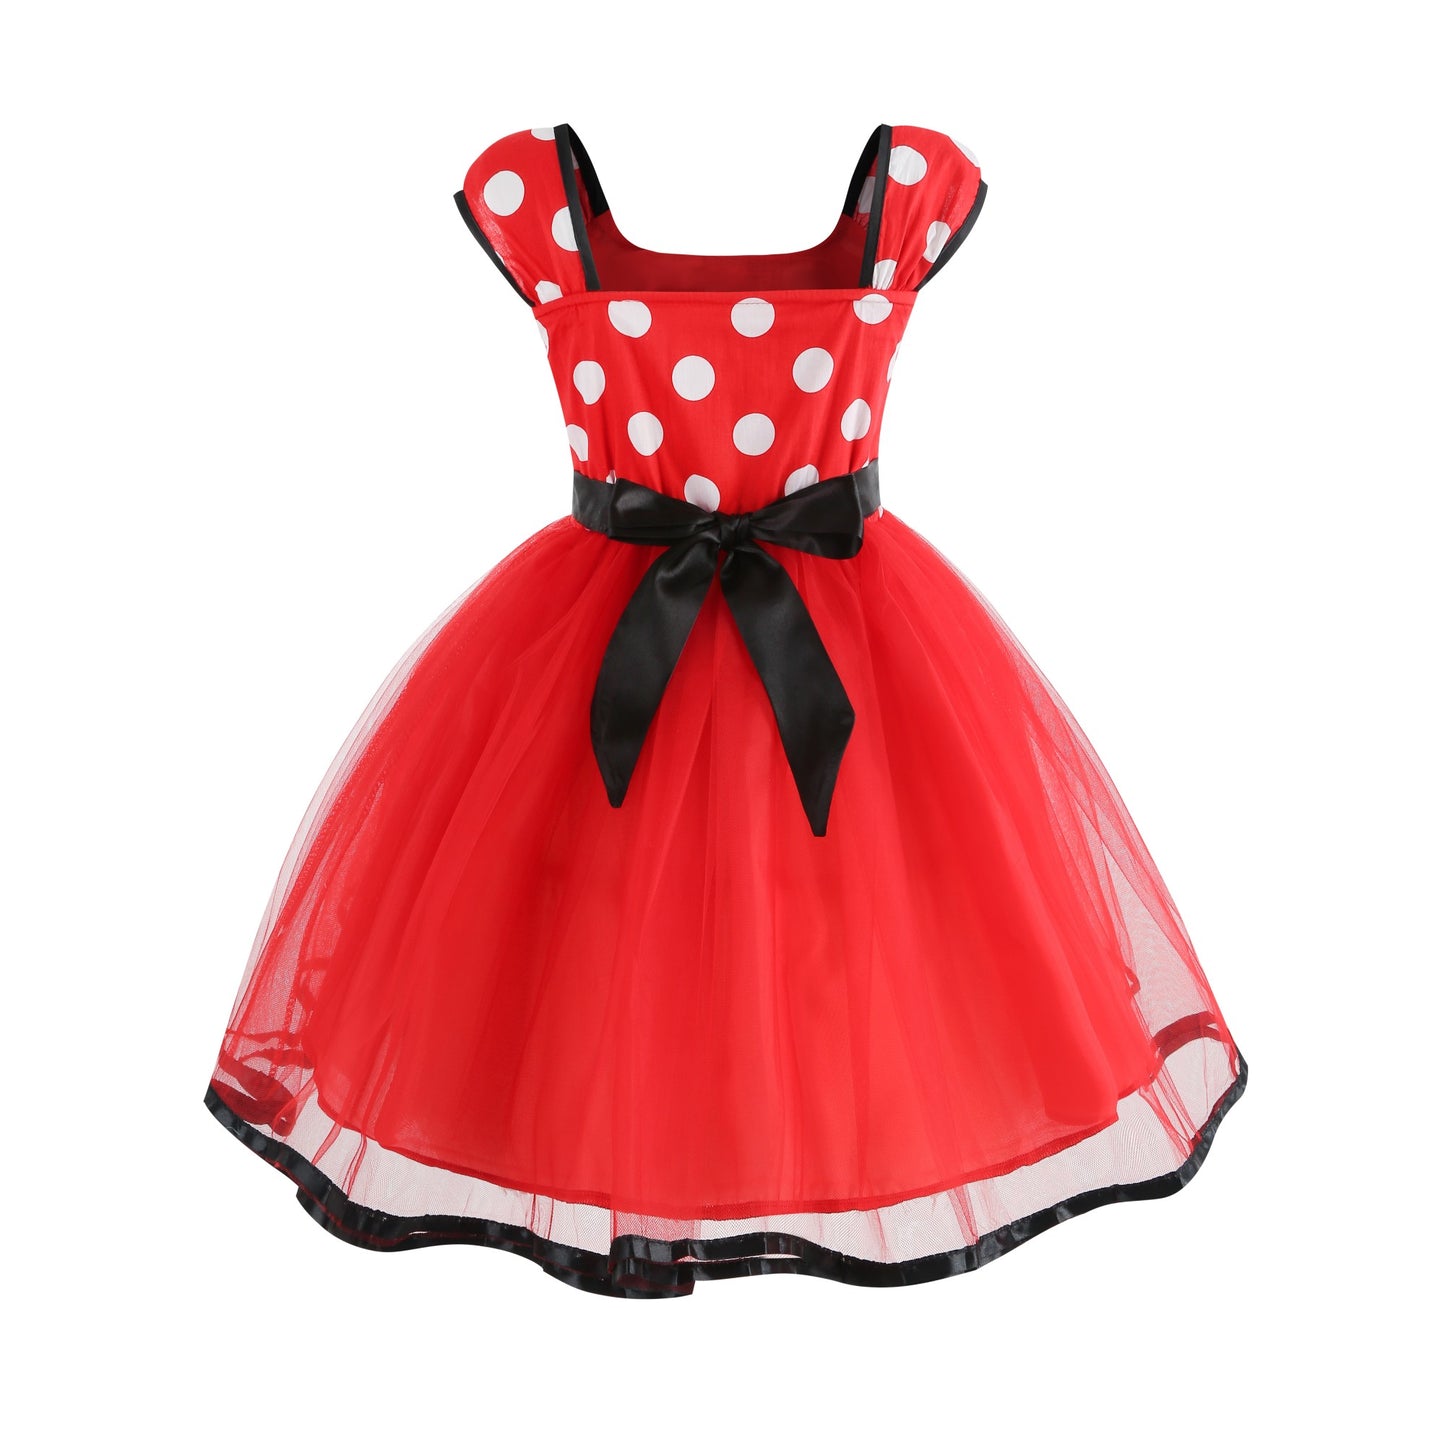 Foierp Adorable Dress for Girls Costume Fancy Dress Up Party Birthday